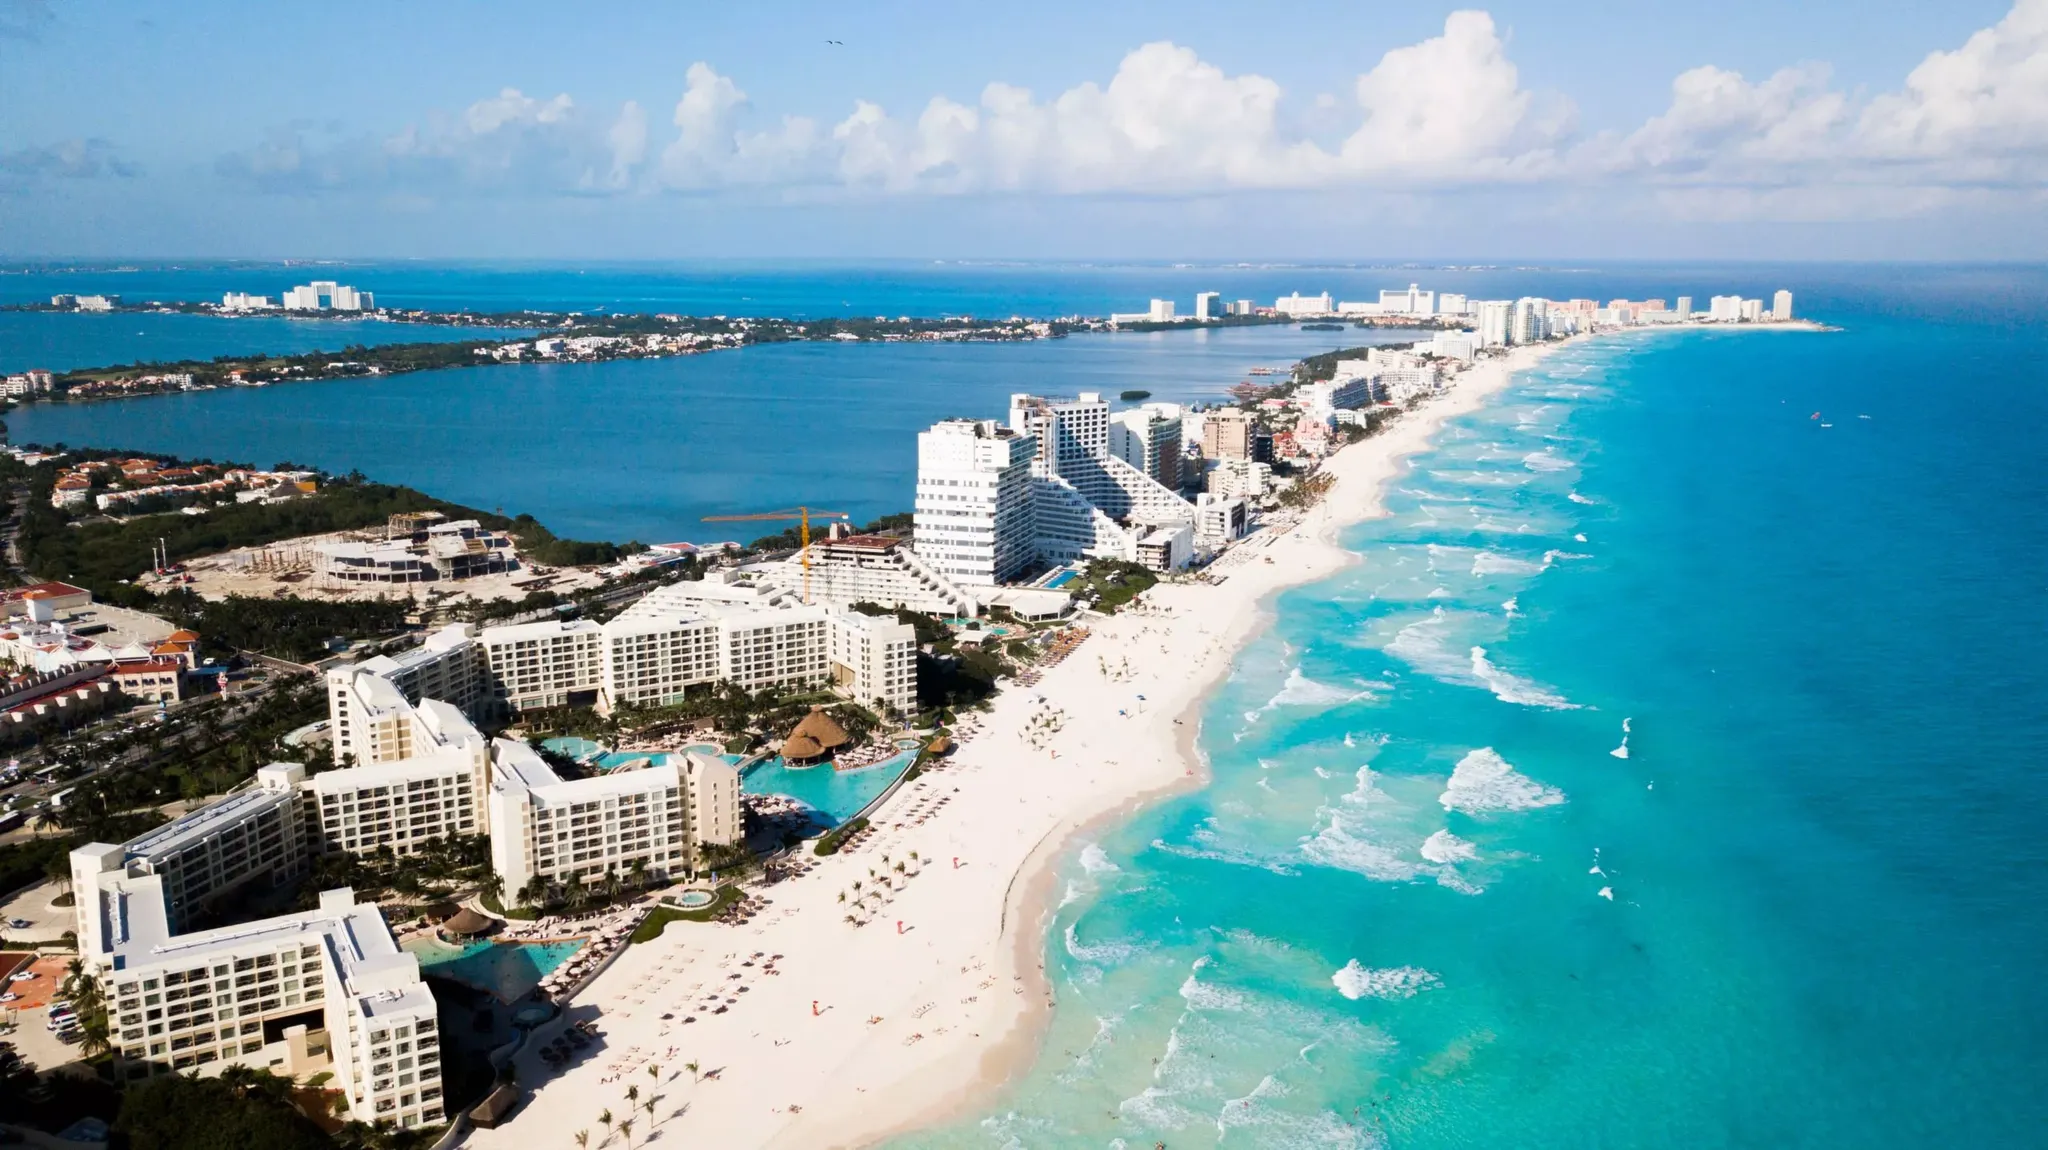 Cancun | Quintana Roo Region, Mexico - Rated 7